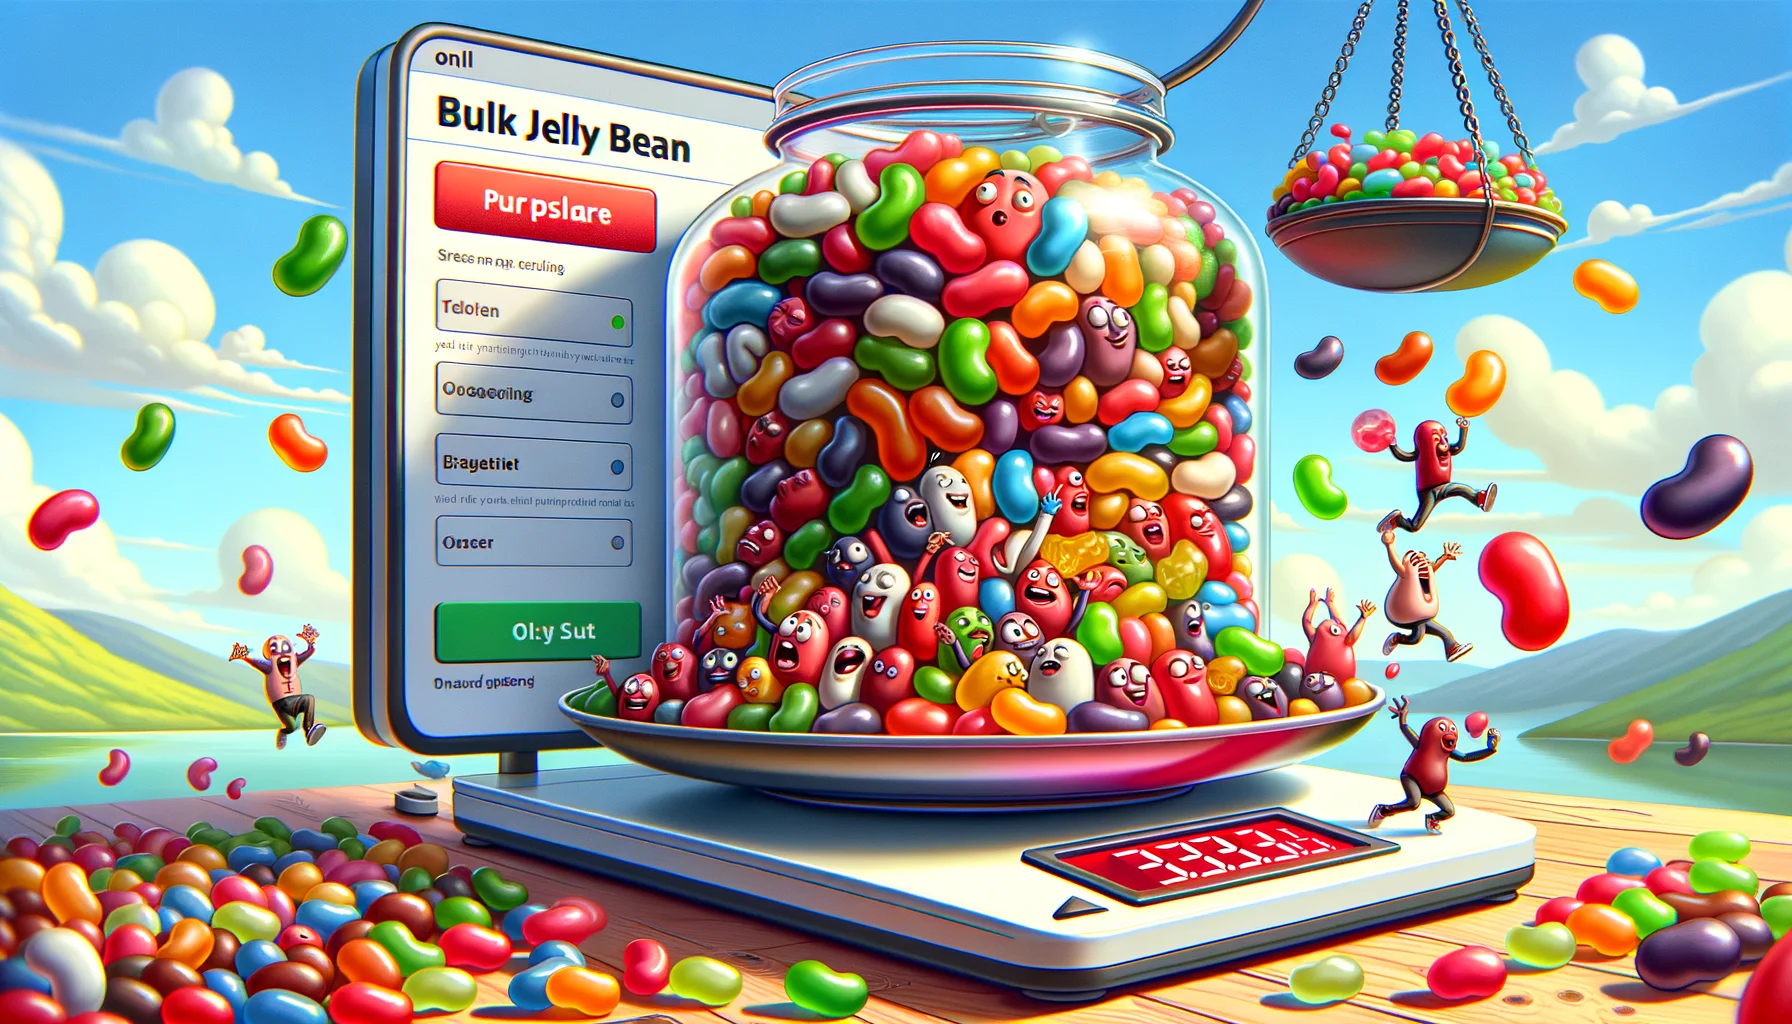 Envision a humorous and eye-catching scene for promoting bulk jelly bean purchases online. Depict a cartoon-style website banner featuring a large red click-to-purchase button and a colorful assortment of jelly beans overflowing from a gigantic glass jar. The jar should be precariously balanced on a digital scale, which is visibly buckling under the weight. A diverse array of anthropomorphic jelly beans hurries to climb into the jar, each showing hilarious facial expressions of determined effort, fear, or exuberance. The scene is bright and light-hearted, with popping colors and funny details that provide lots to look at.